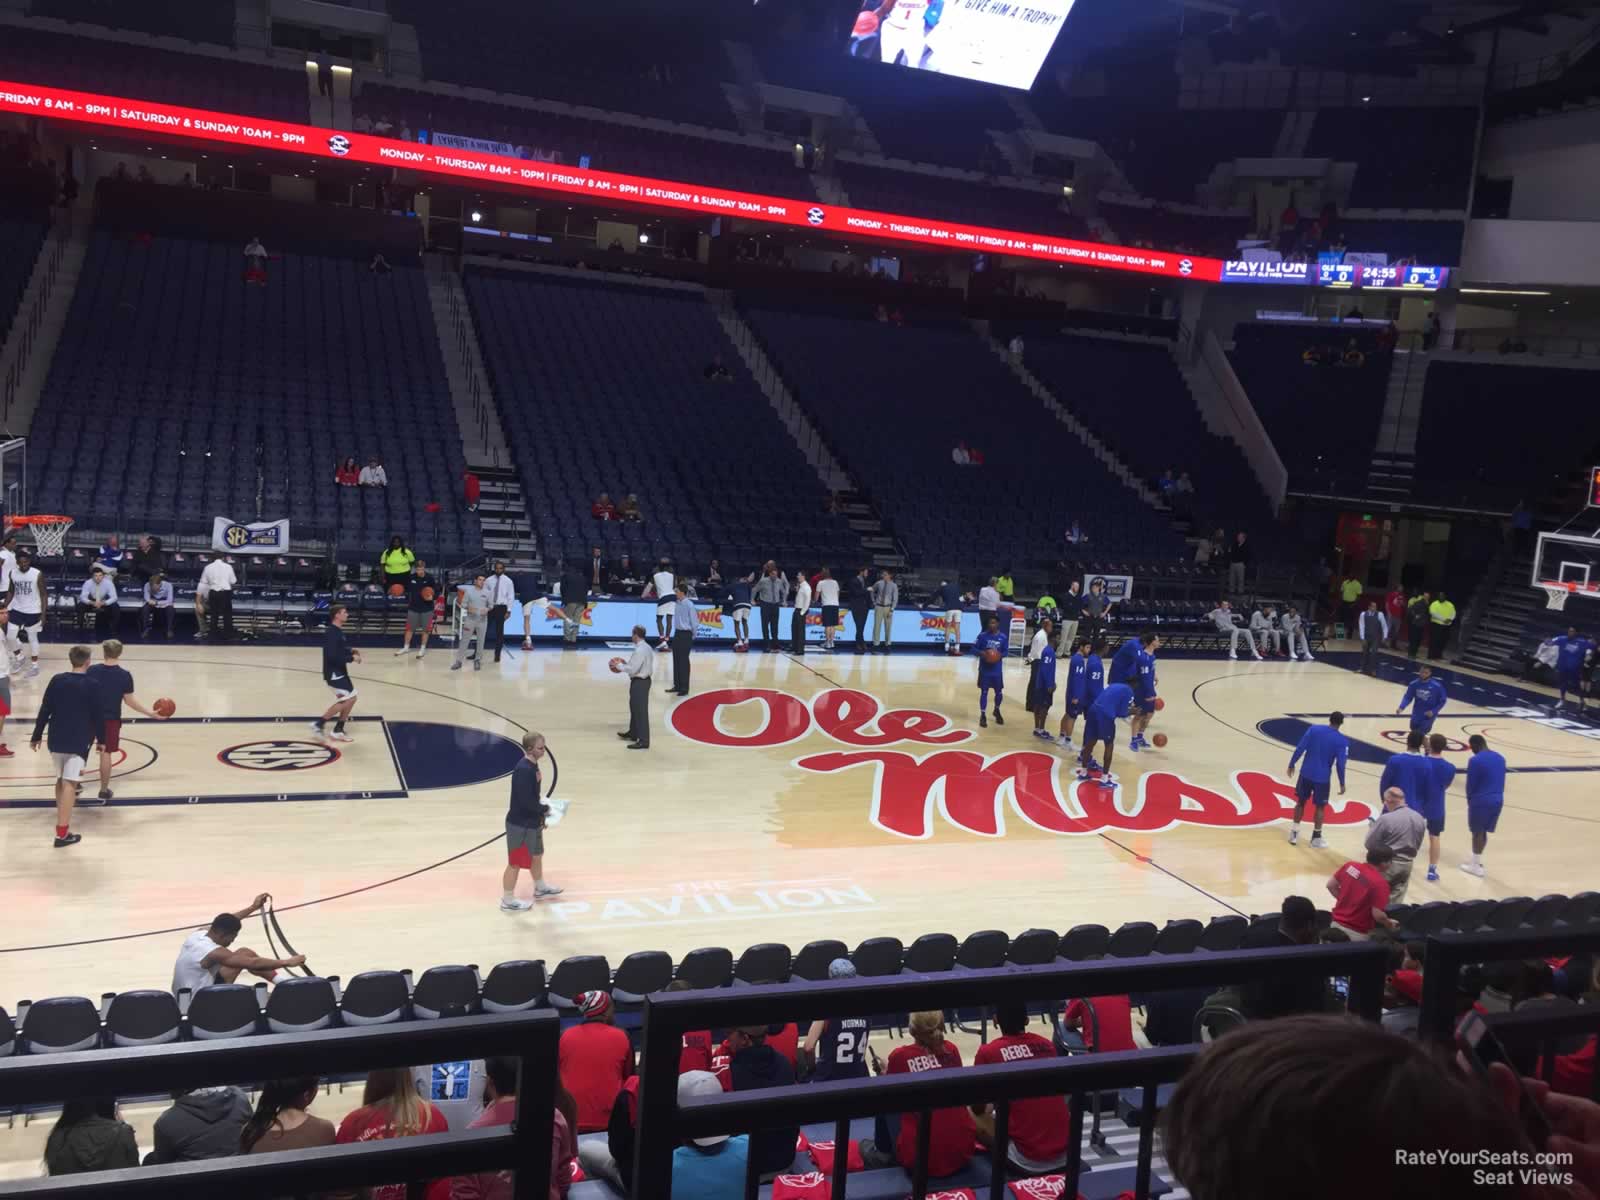 section 104, row 2 seat view  - pavilion at ole miss